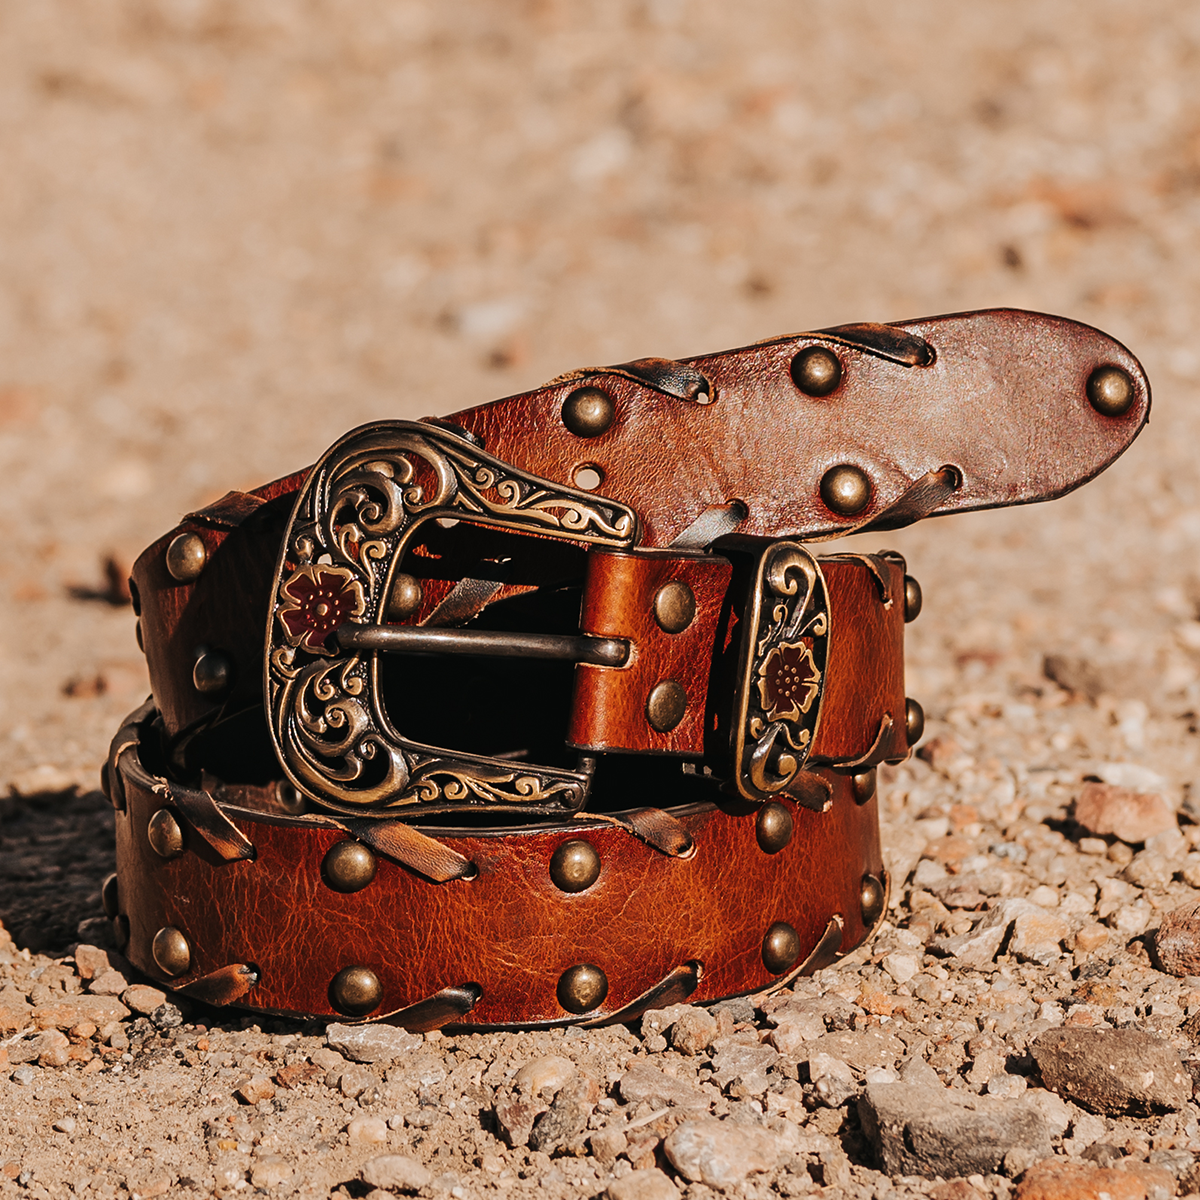 FREEBIRD Whip brown full grain leather belt featuring embroidered detailing and stud embellishments lifestyle